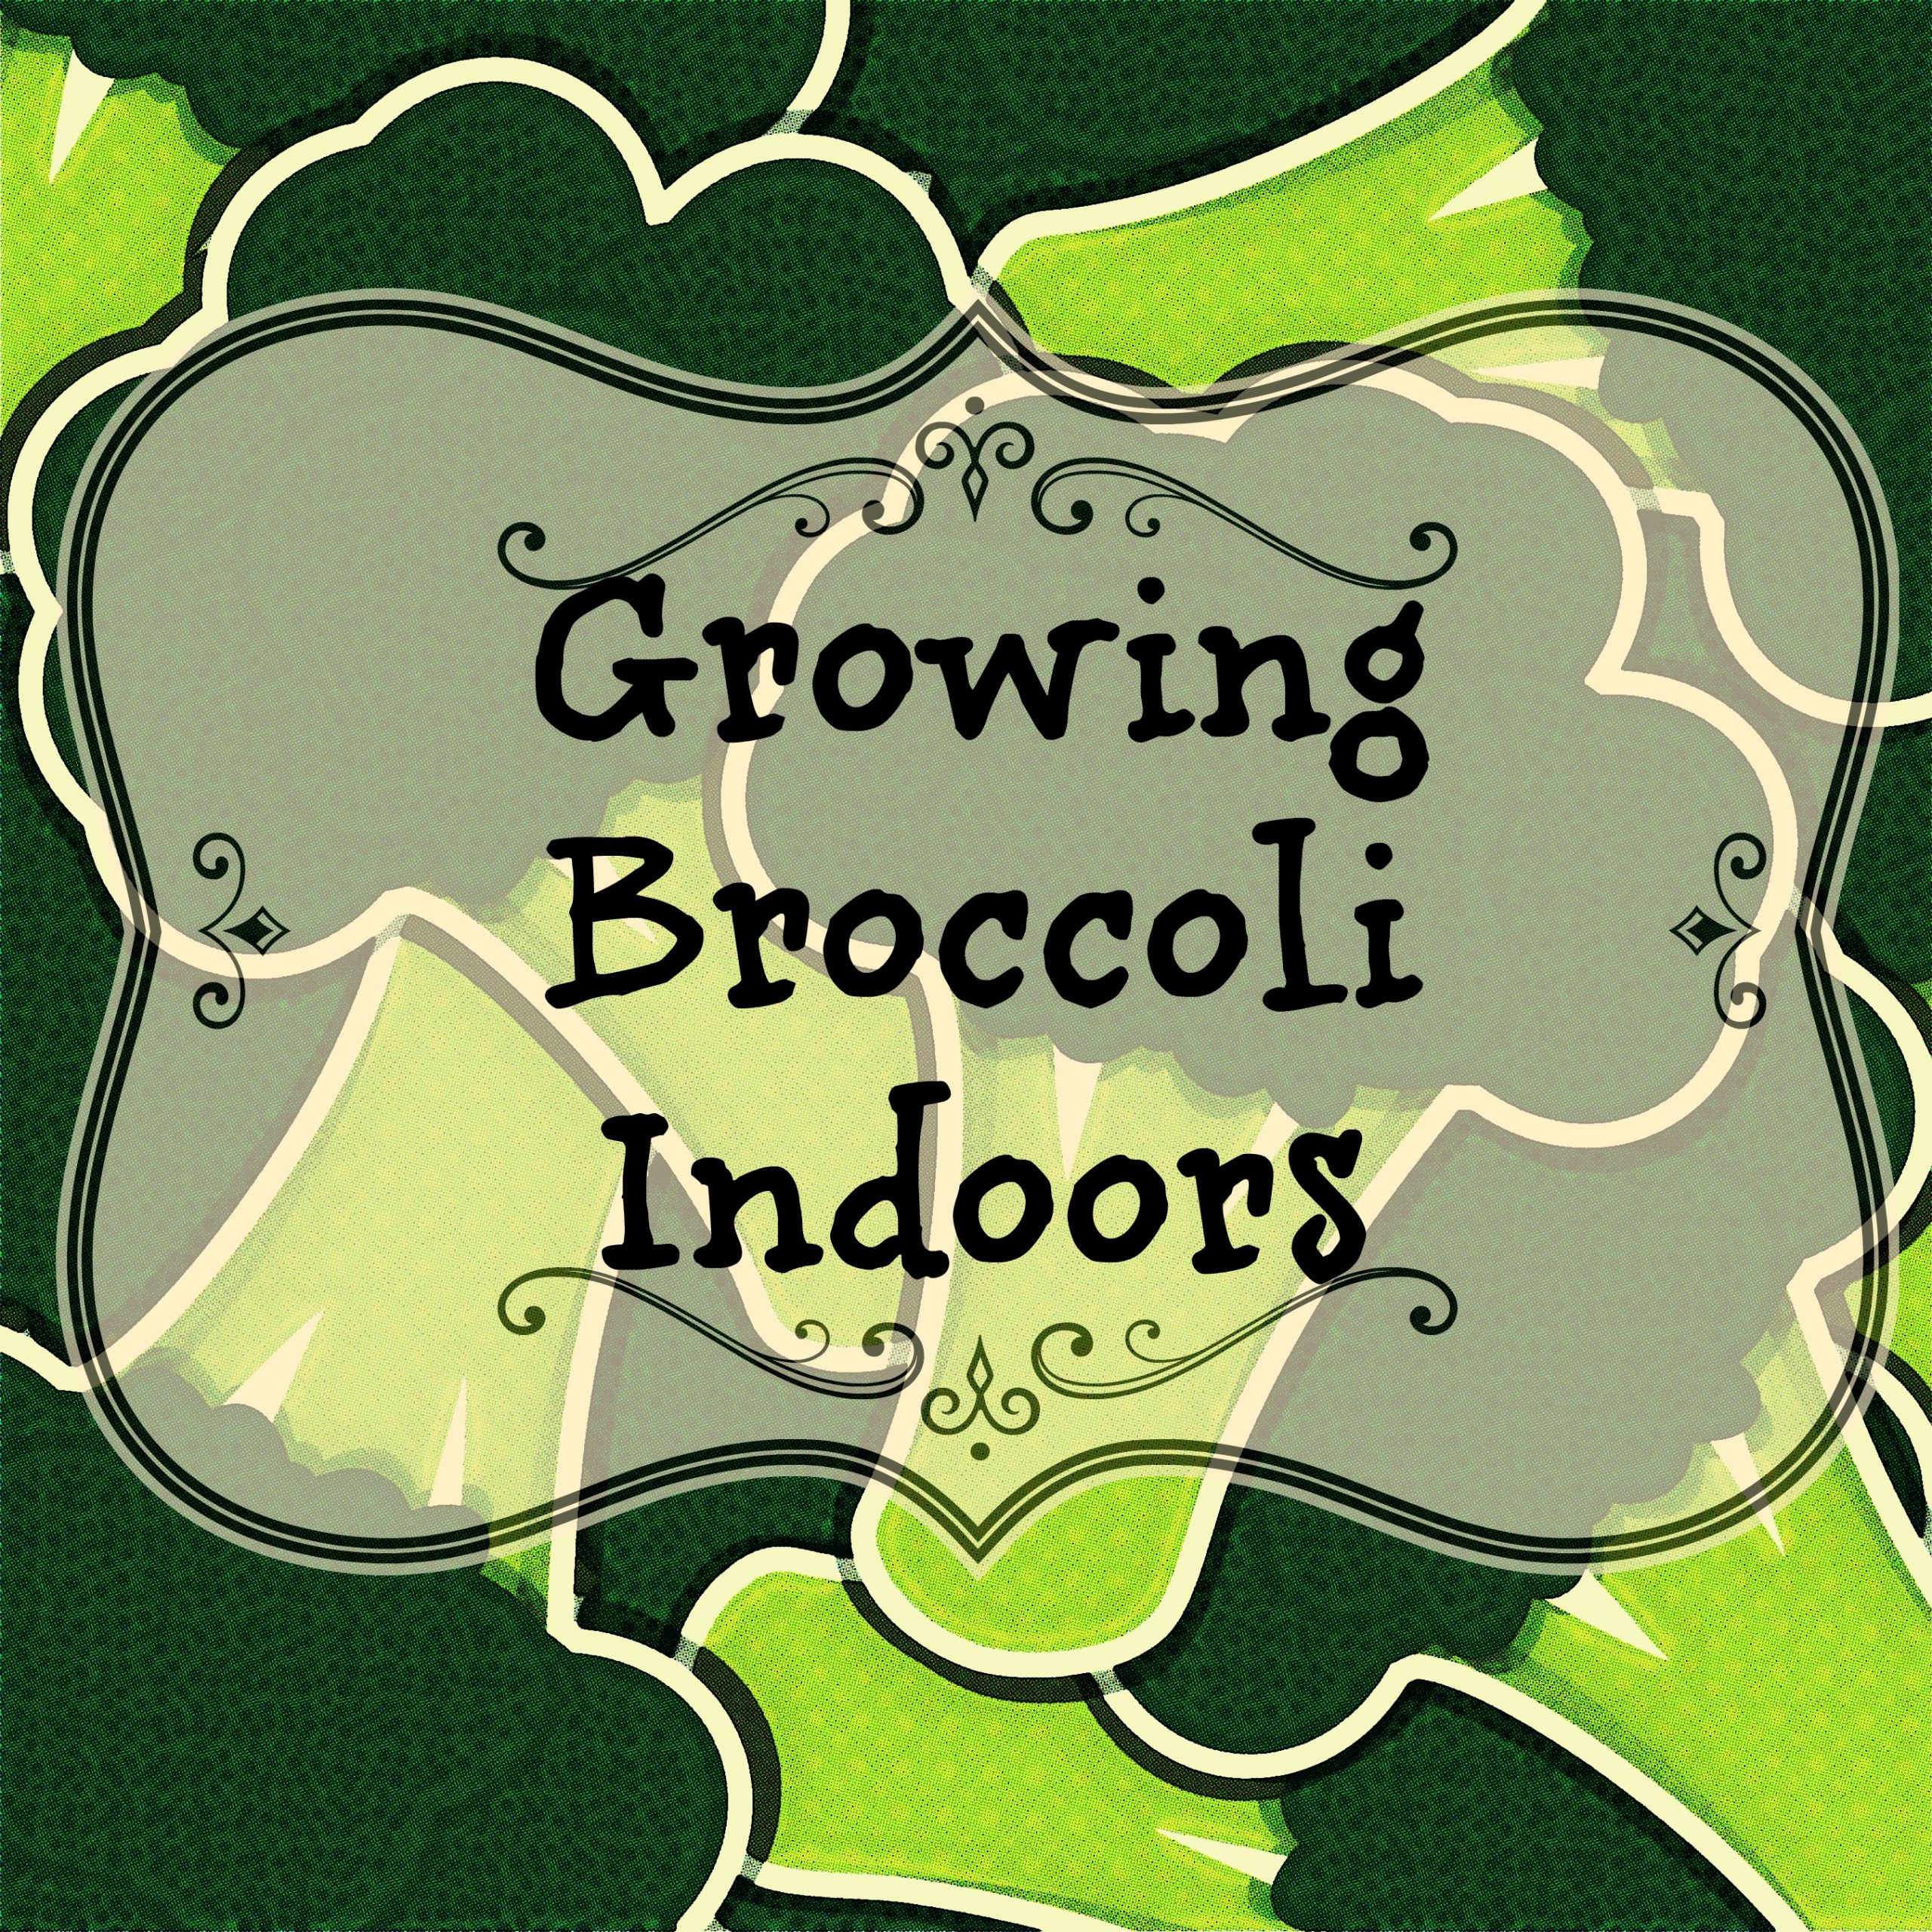 You are currently viewing Growing Broccoli Indoors